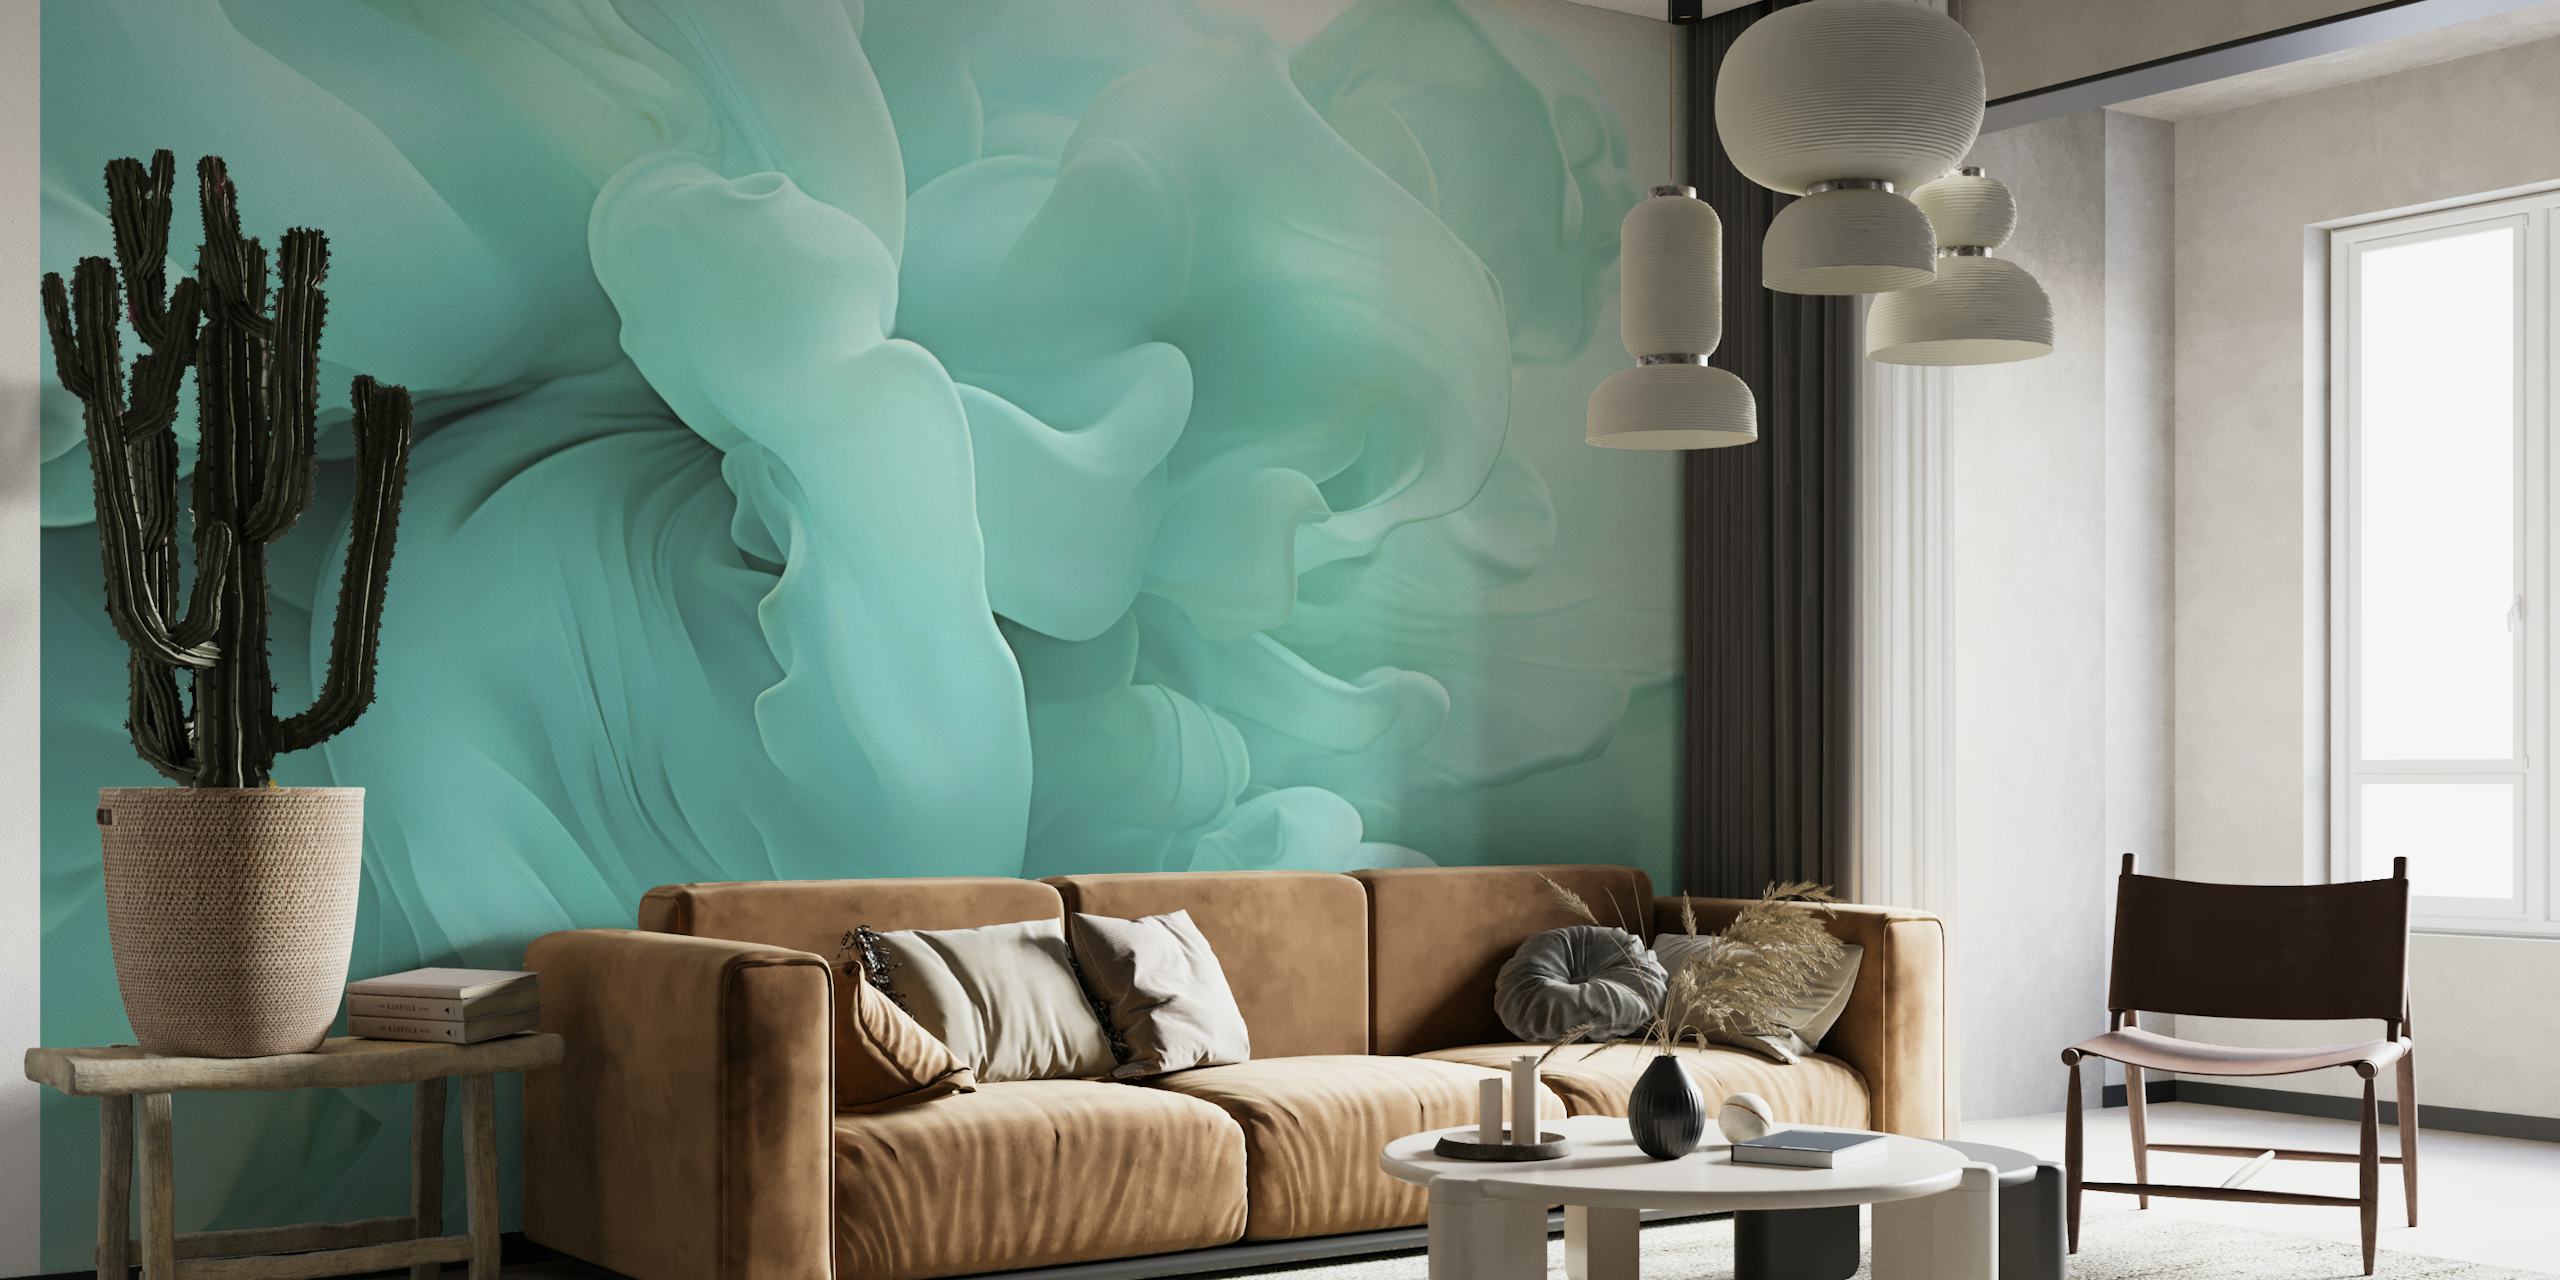 Ethereal Fluid Dreams Turquoise Teal wallpaper